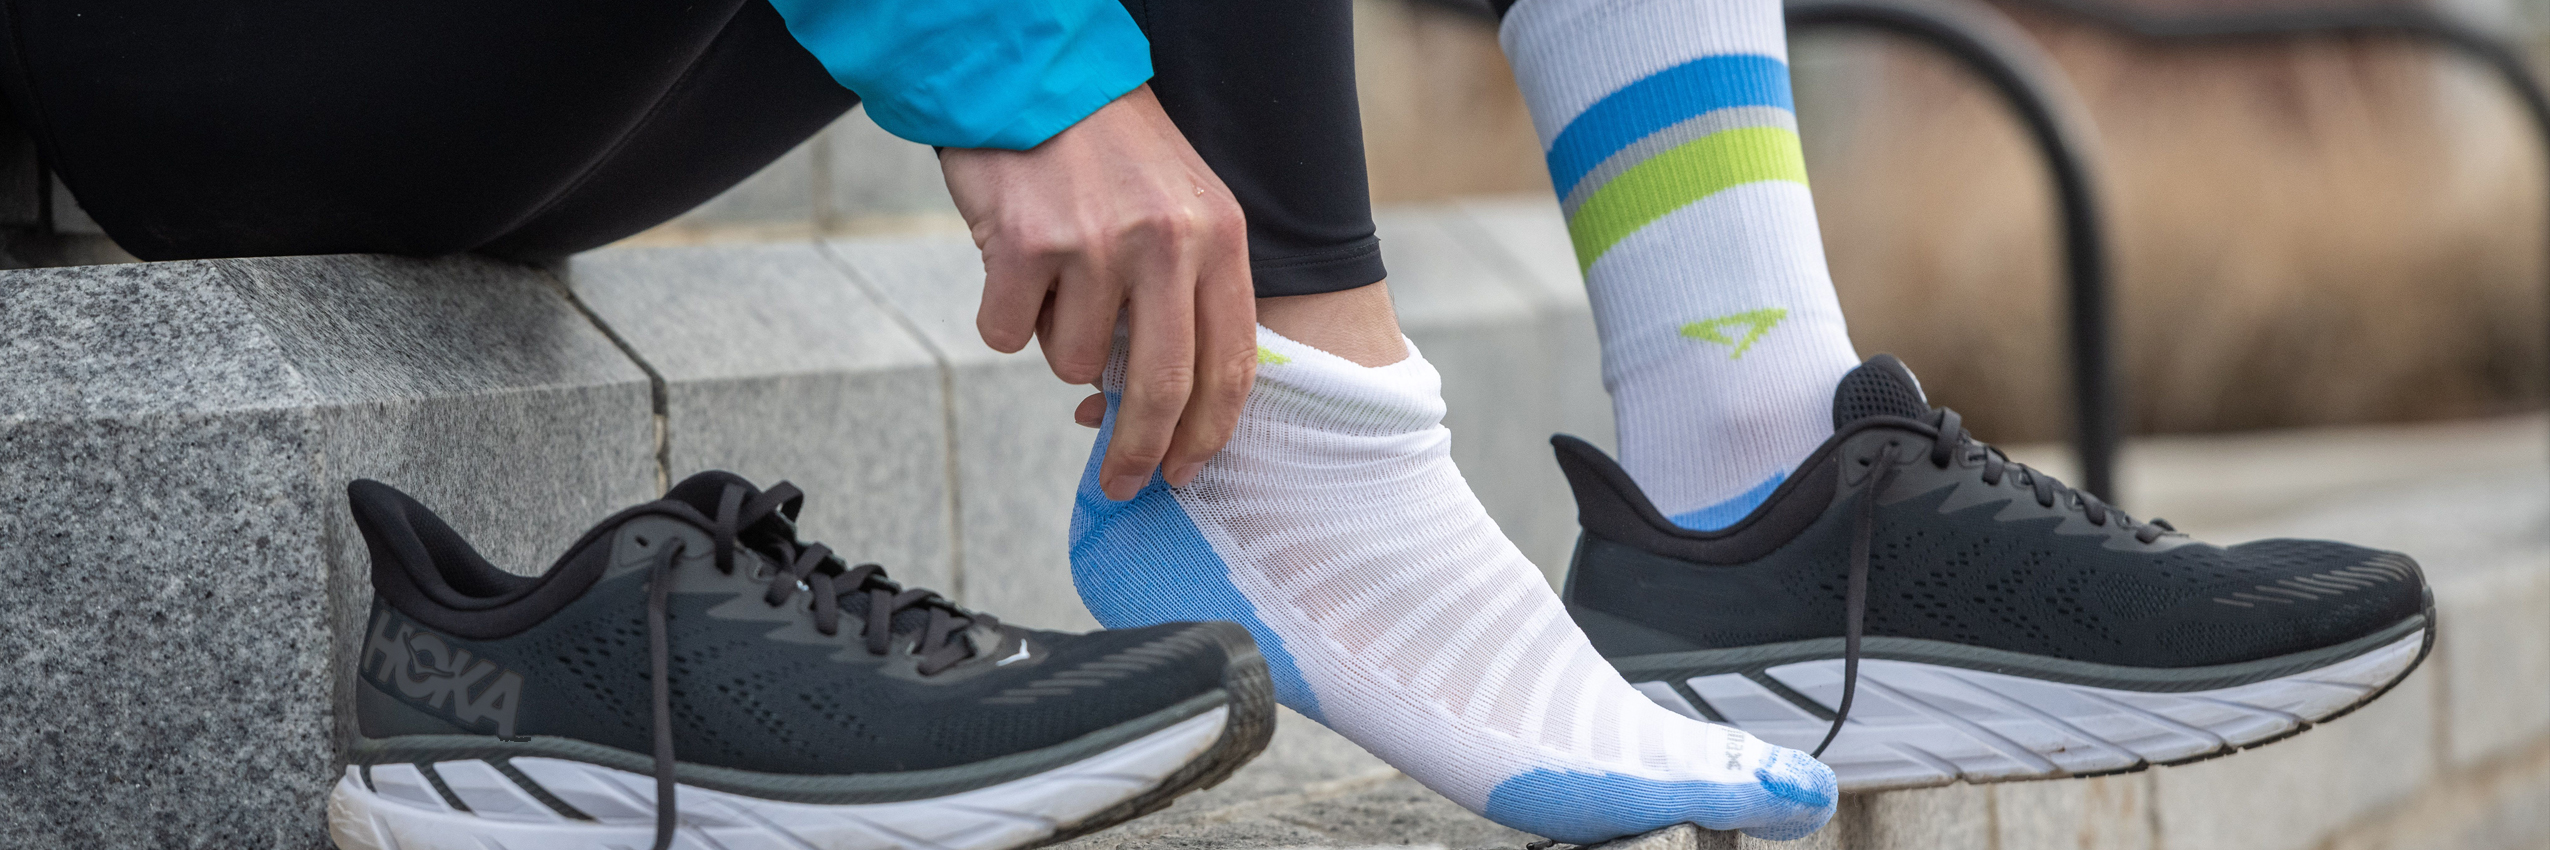 Drymax Sports - Sock Fit & Technical Features